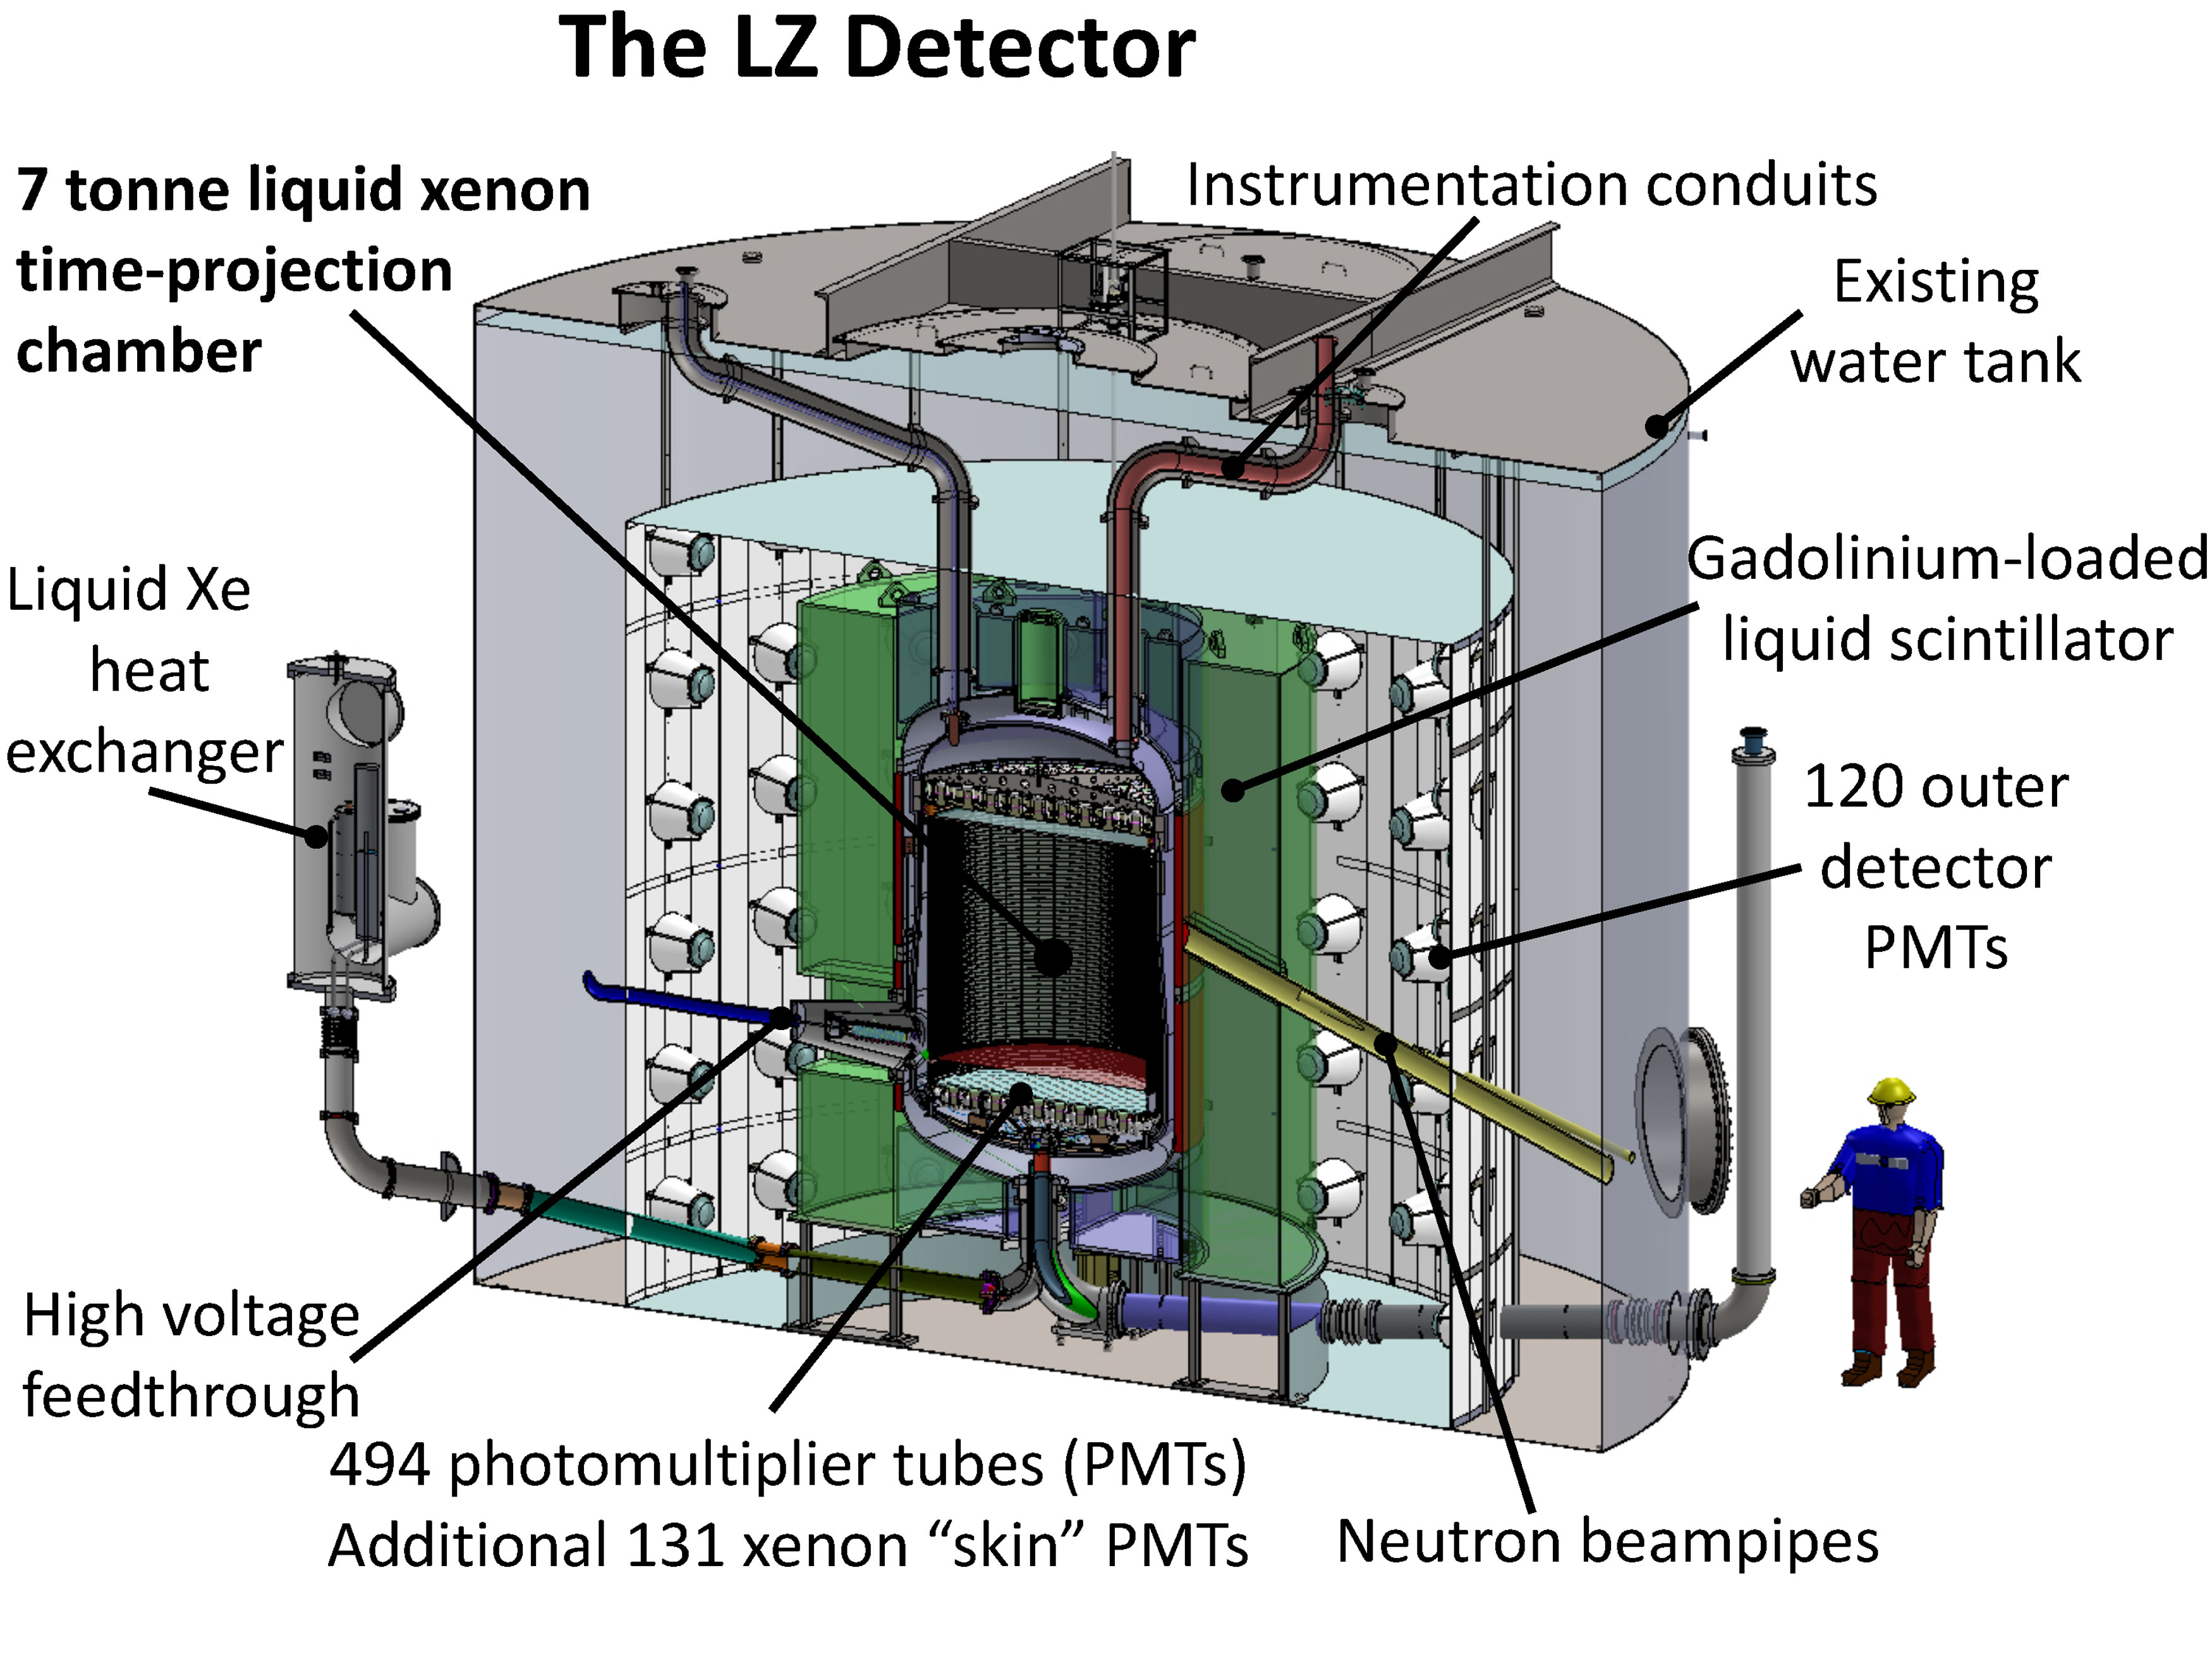 A cross-section of an LZ detector. See text below for detailed explanation.